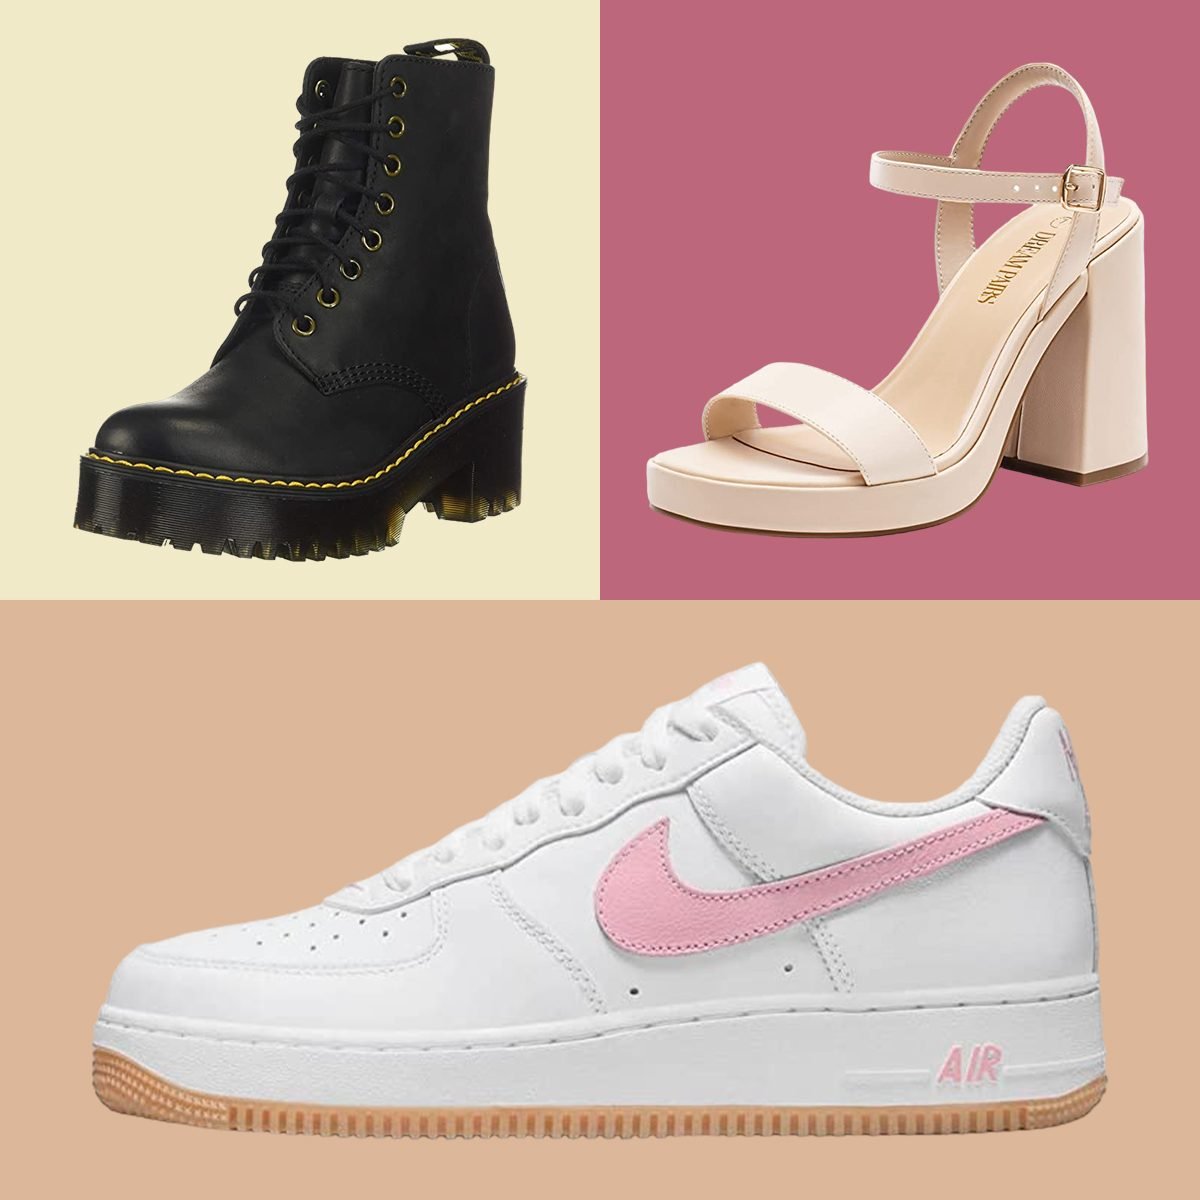 Best Cheap Summer Shoes and Accessories from  - Meg O. on the Go